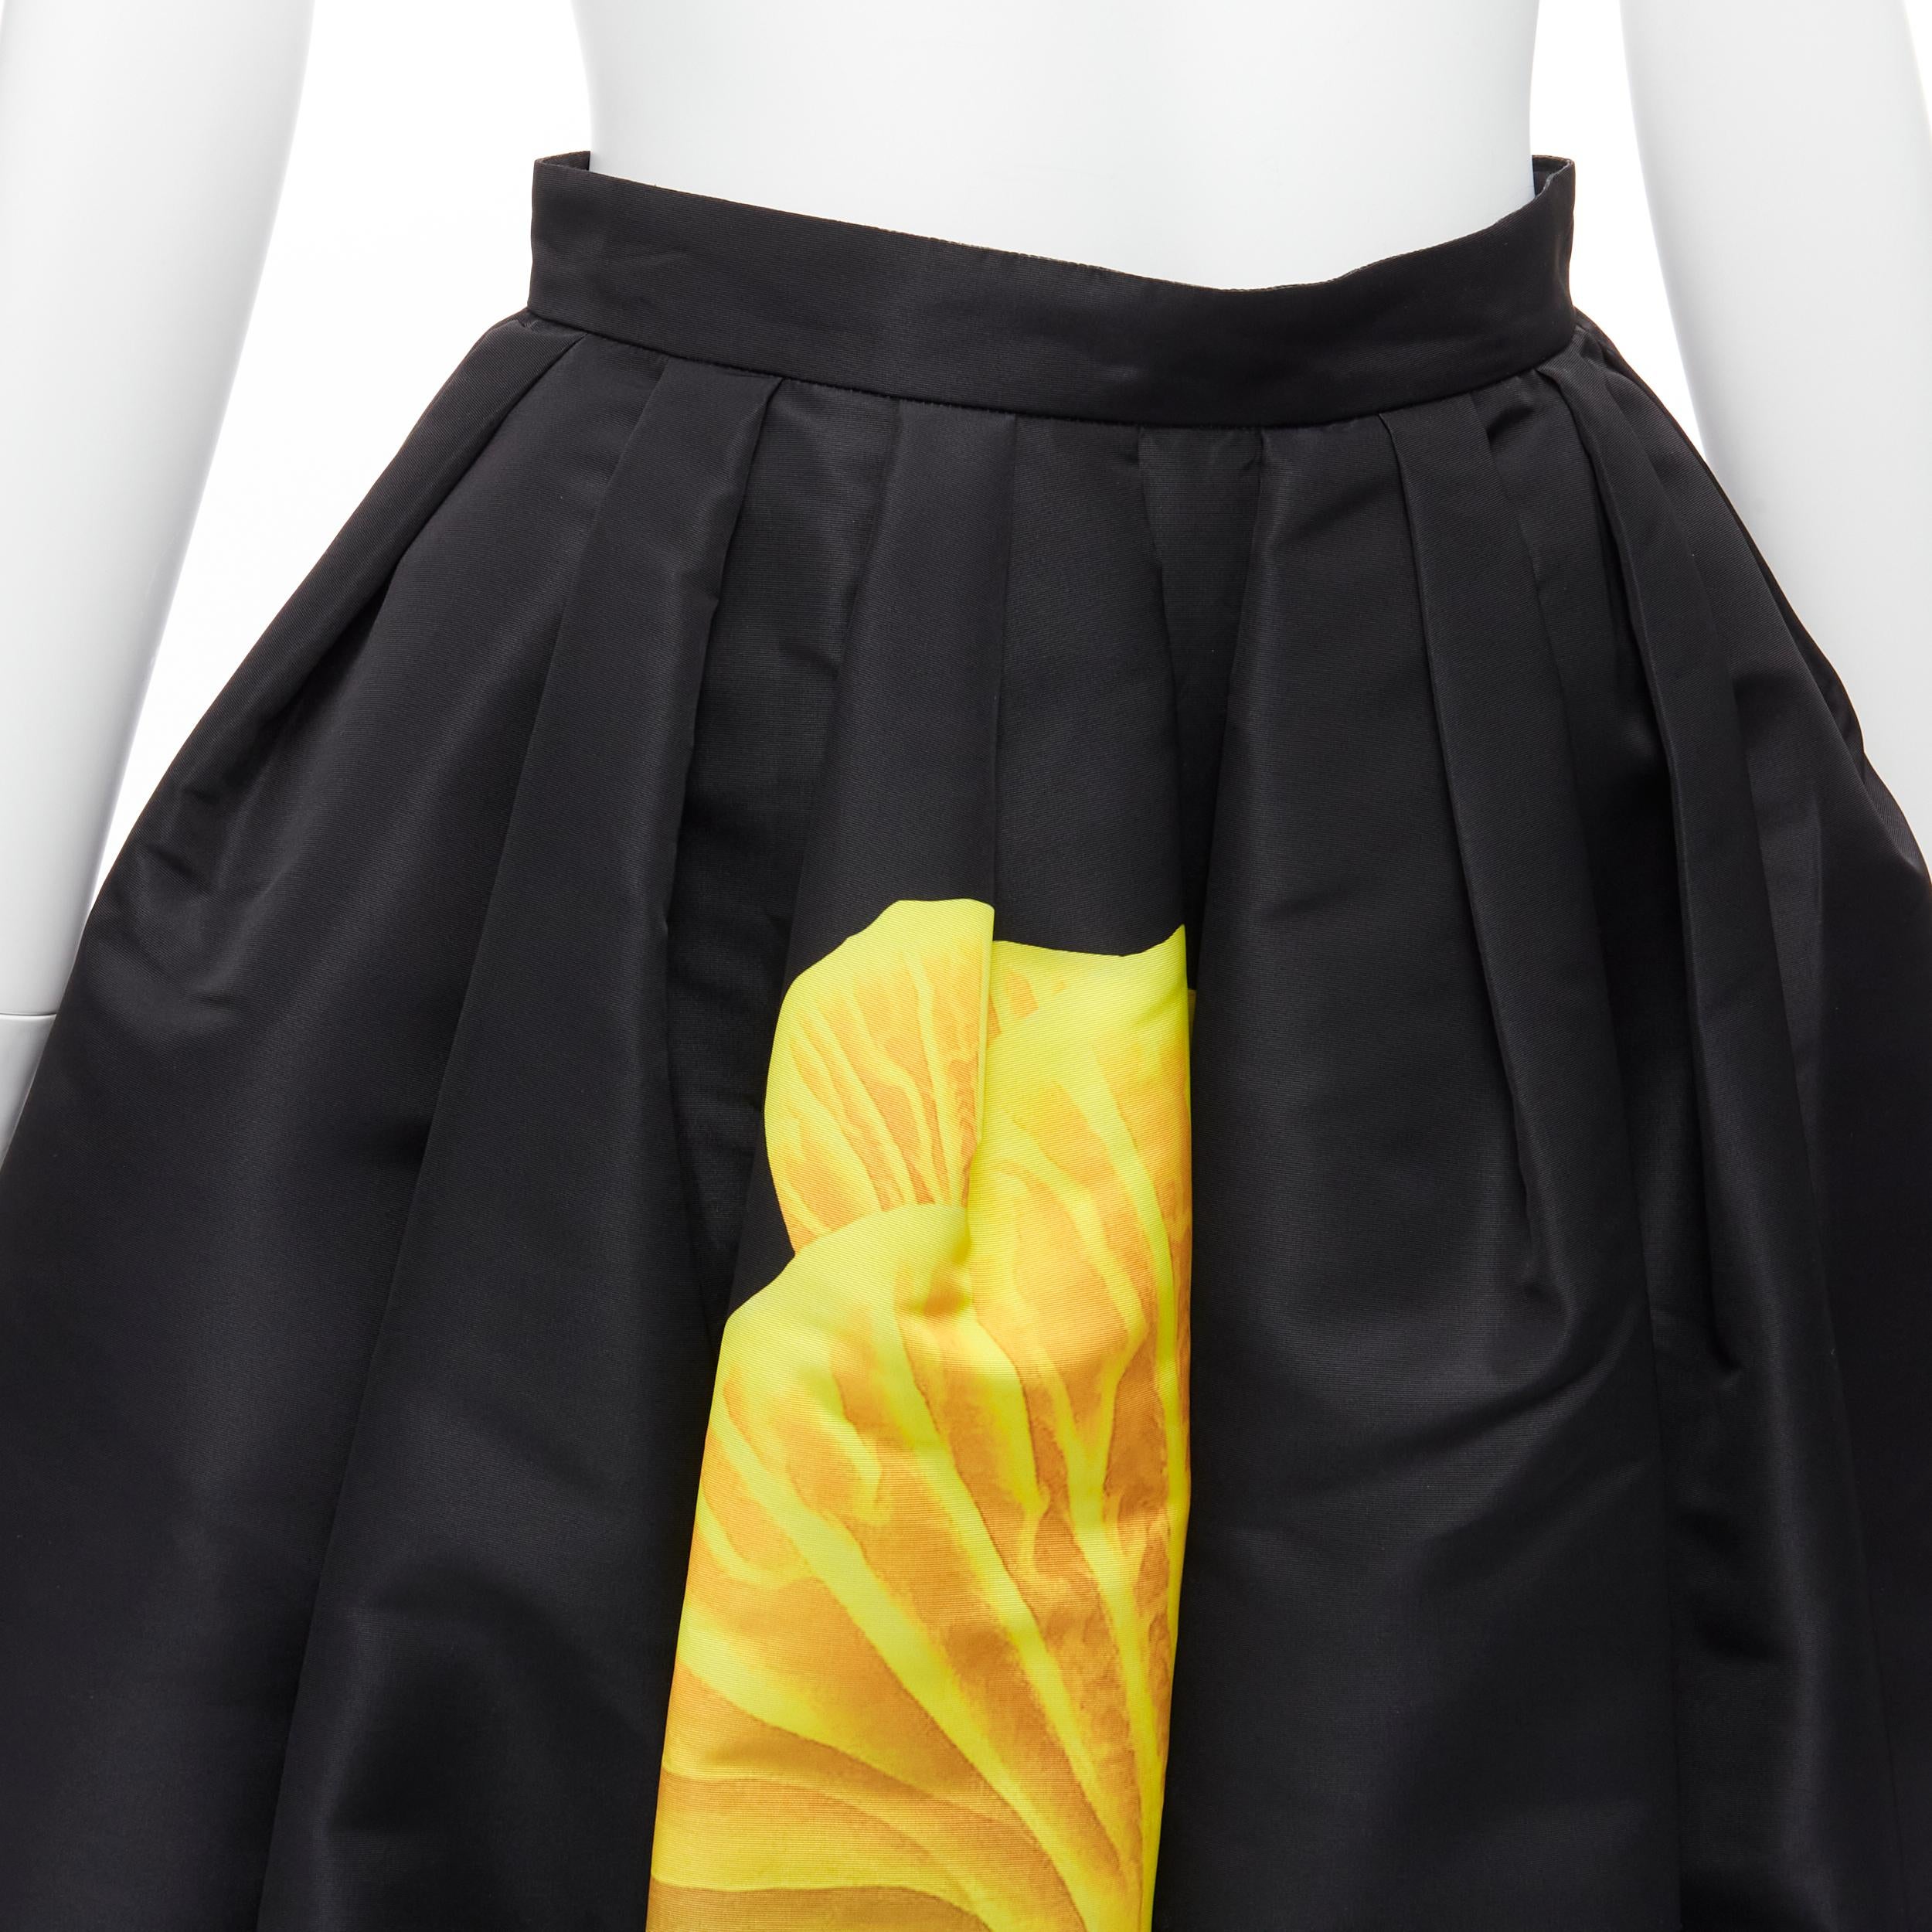 ALEXANDER MCQUEEN 2022 yellow flower print black flared full cocktail skirt IT38 XS
Reference: AAWC/A00496
Brand: Alexander McQueen
Designer: Sarah Burton
Collection: 2022
Material: Polyester
Color: Black, Yellow
Pattern: Floral
Closure: Zip
Extra